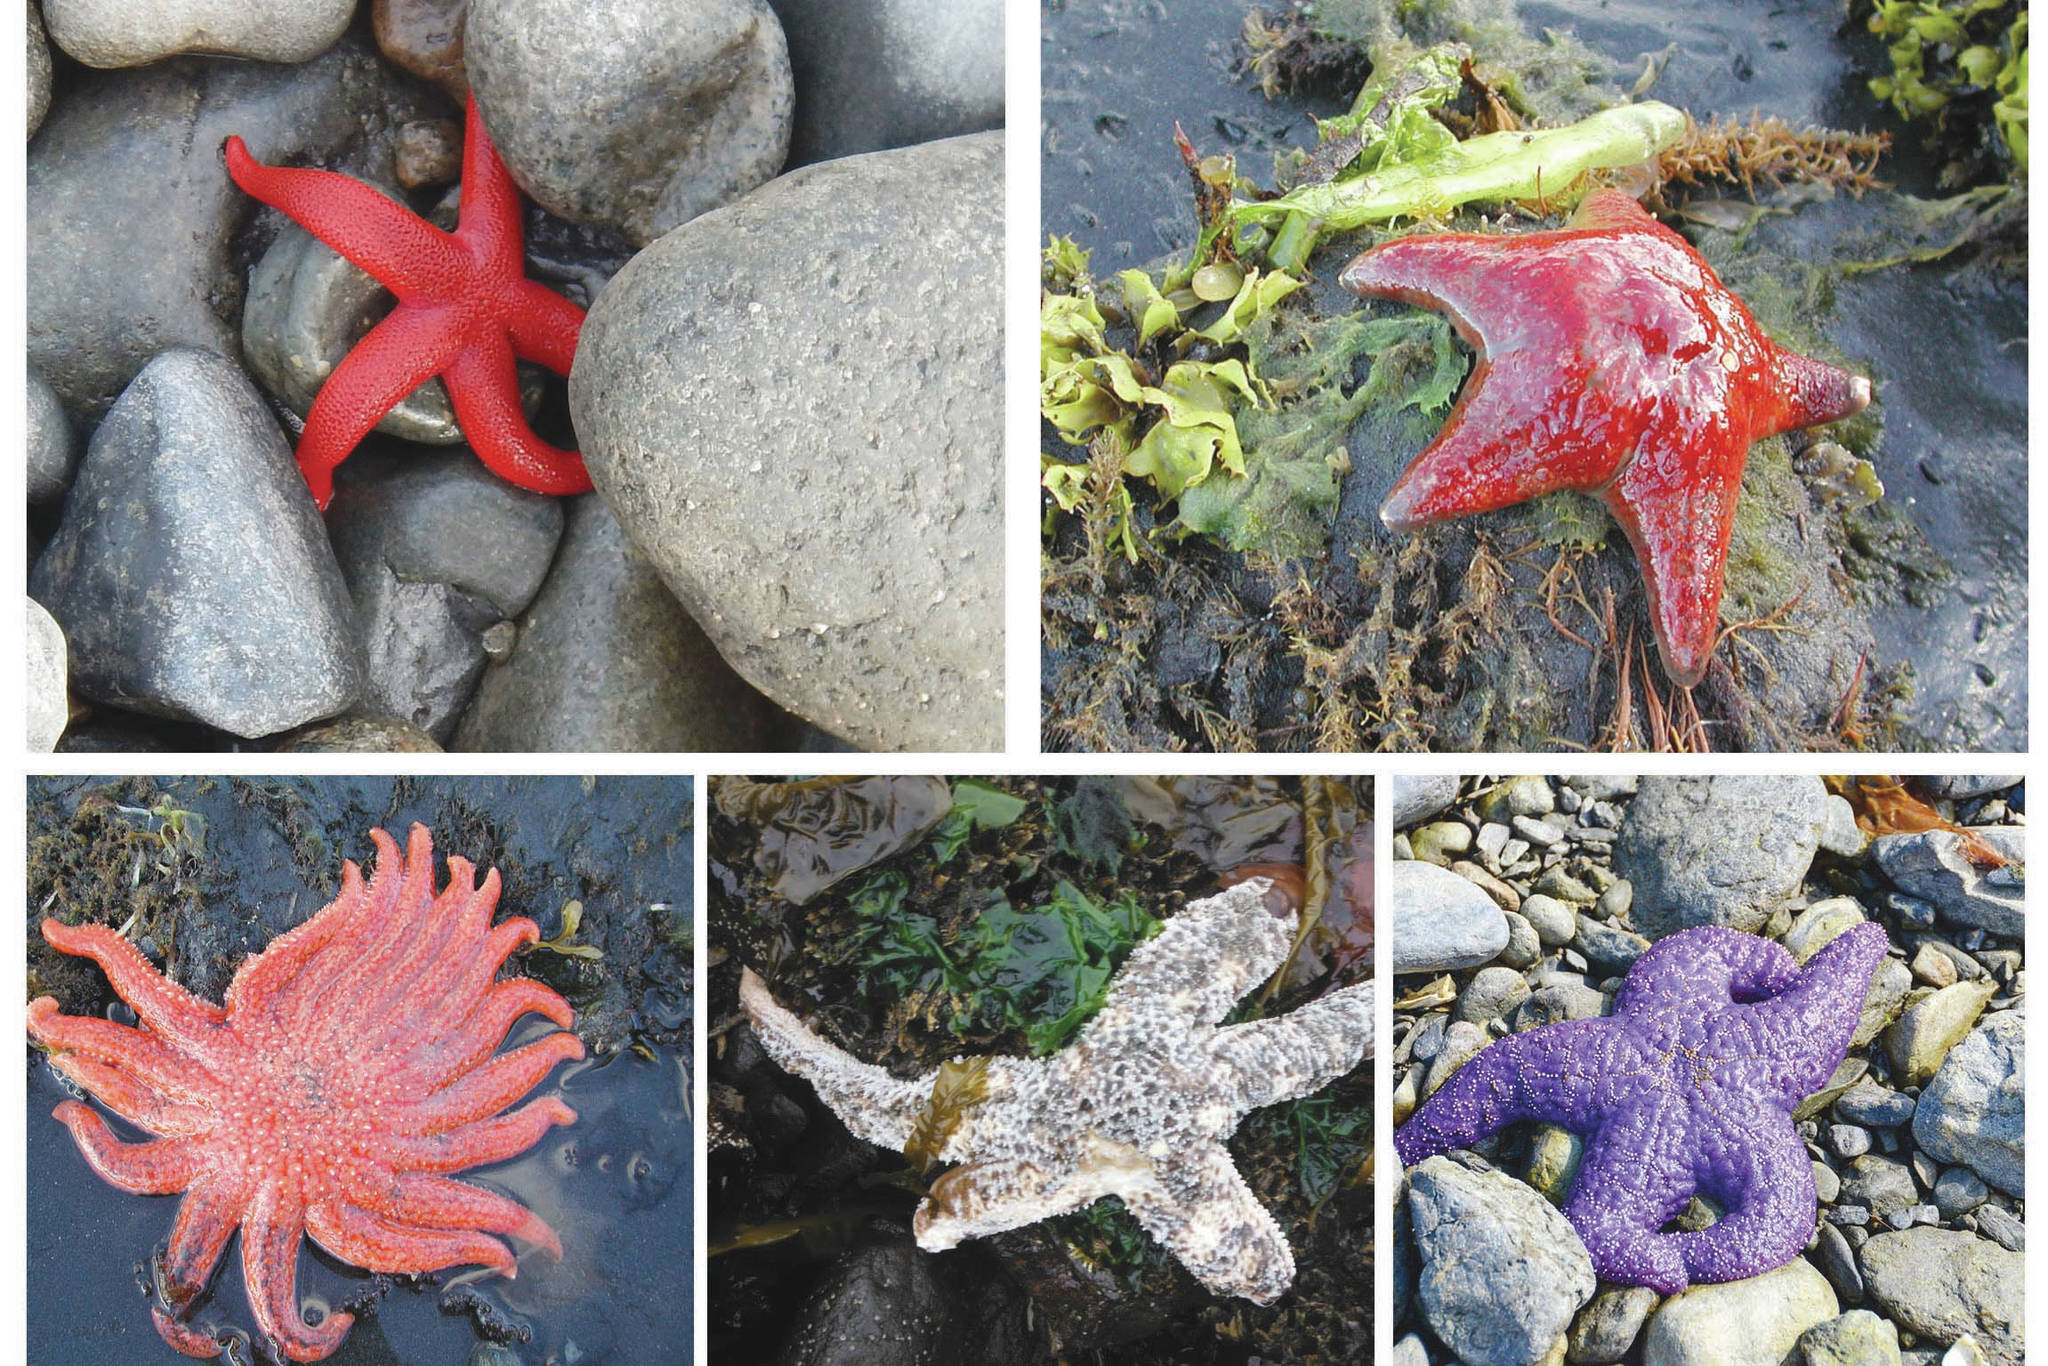 Blood stars (top left) and leather stars (top right) were less impacted by the disease and are more likely to be seen today. Sunflower sea stars (bottom left), mottled sea stars (lower center, this one showing symptoms of disease) and ochre sea stars (lower right) used to be common, but were most affected by the disease and have become more rare. (Photos courtesy of Mandy Lindeberg, NOAA, and Brenda Konar, University of Alaska Fairbanks)